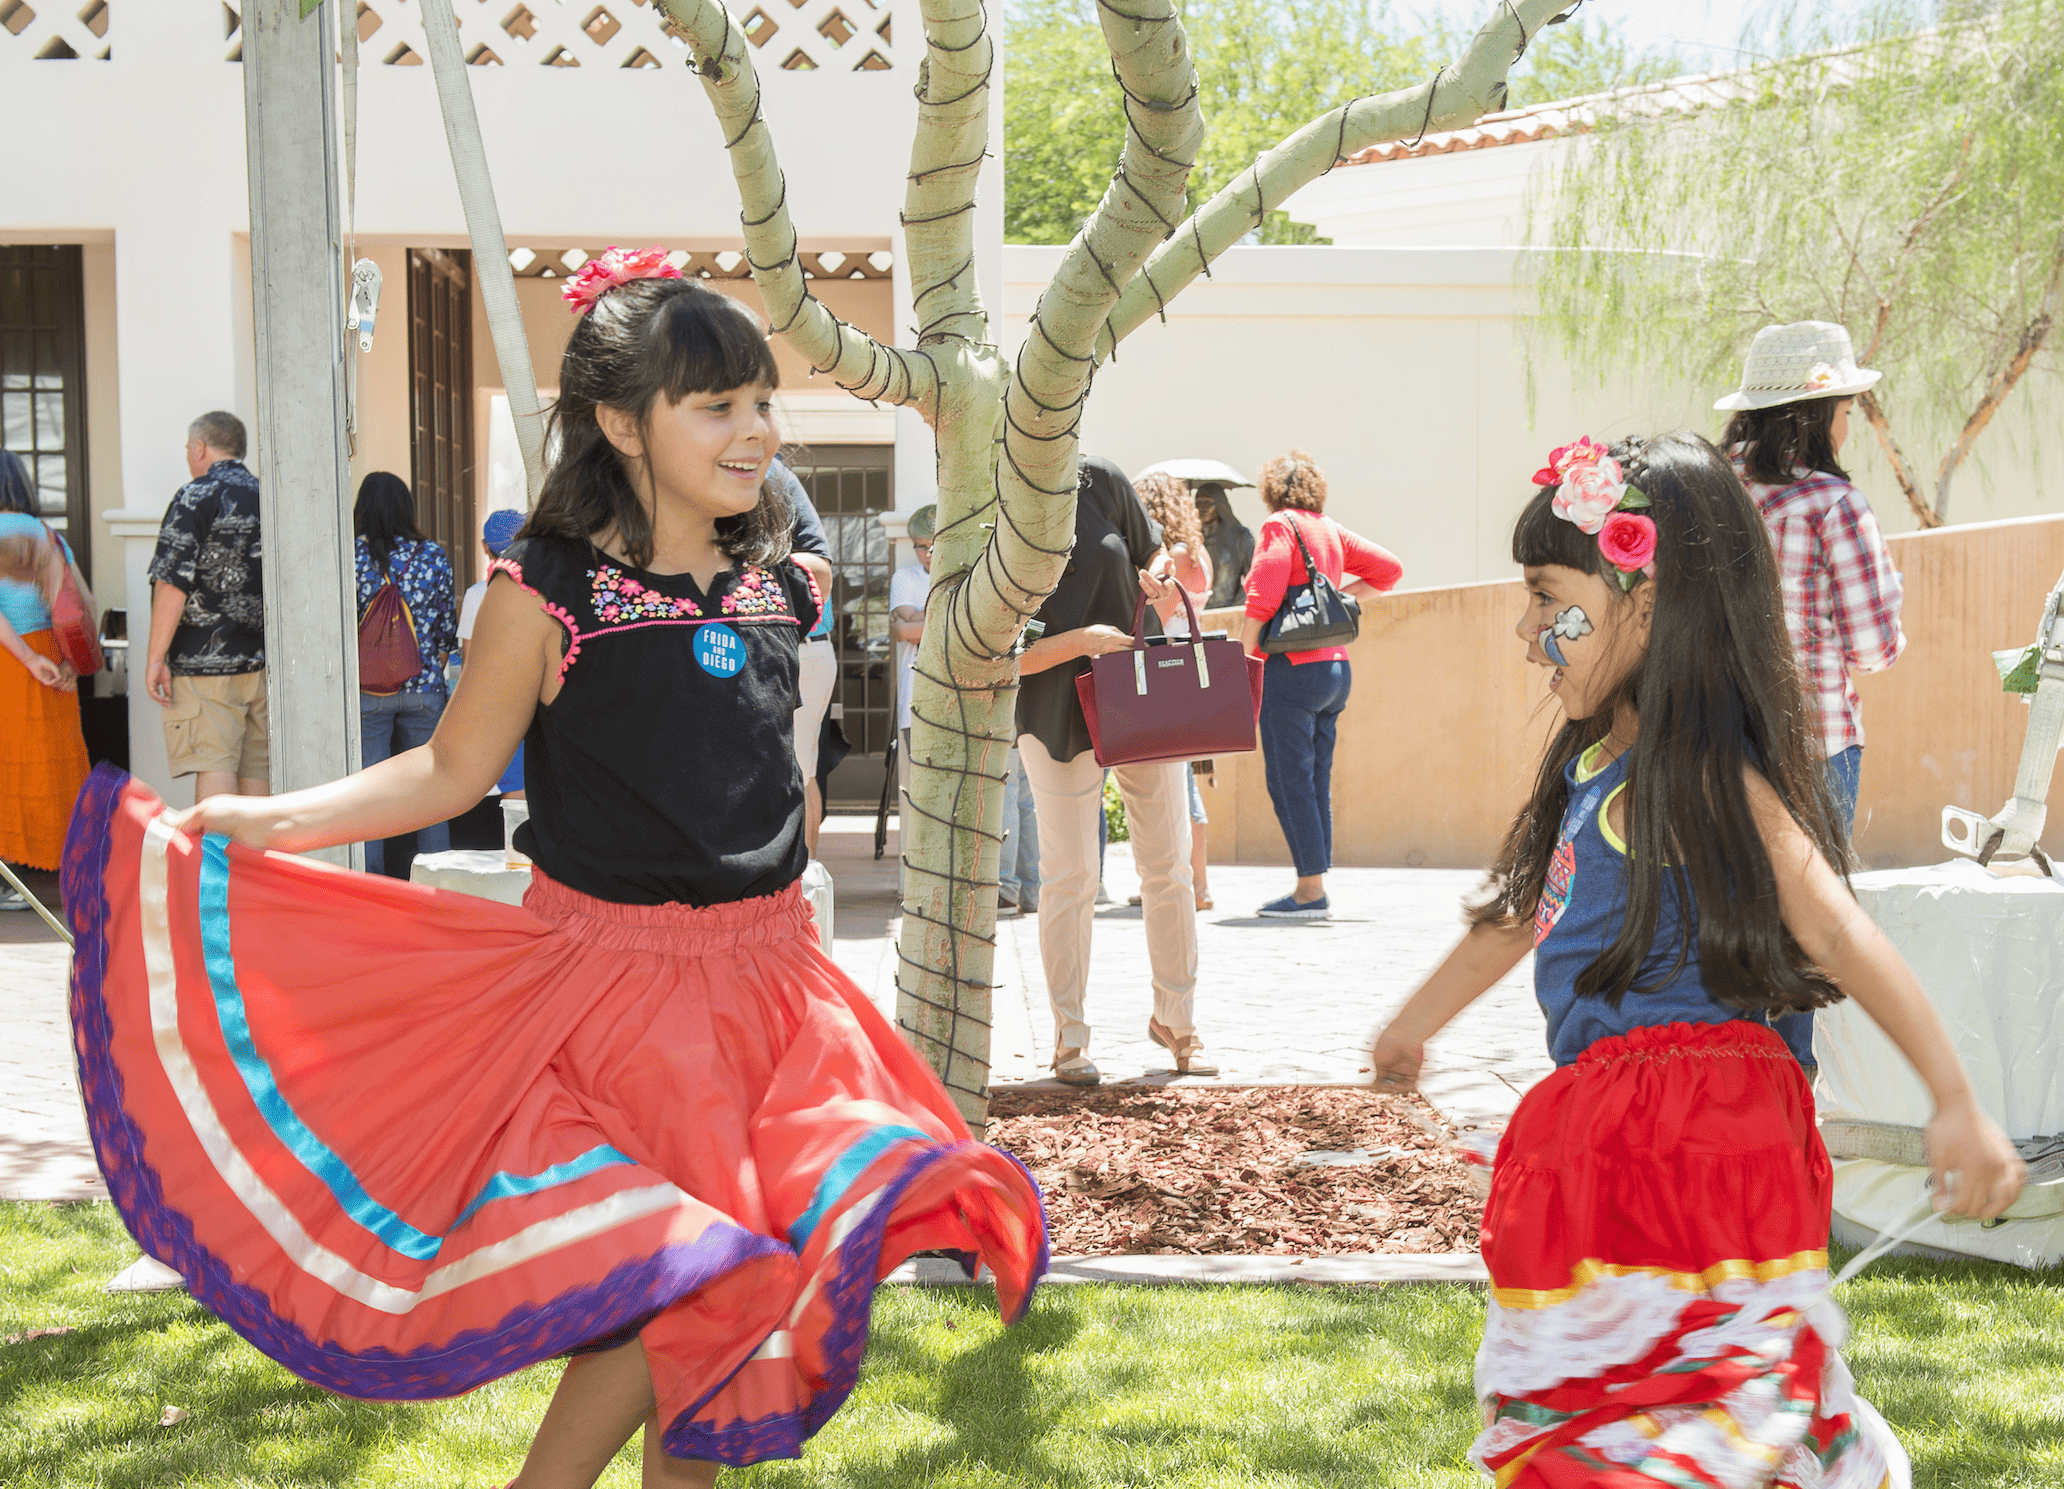 Two girls in colorful traditional dresses dancing under a tree at an outdoor event.